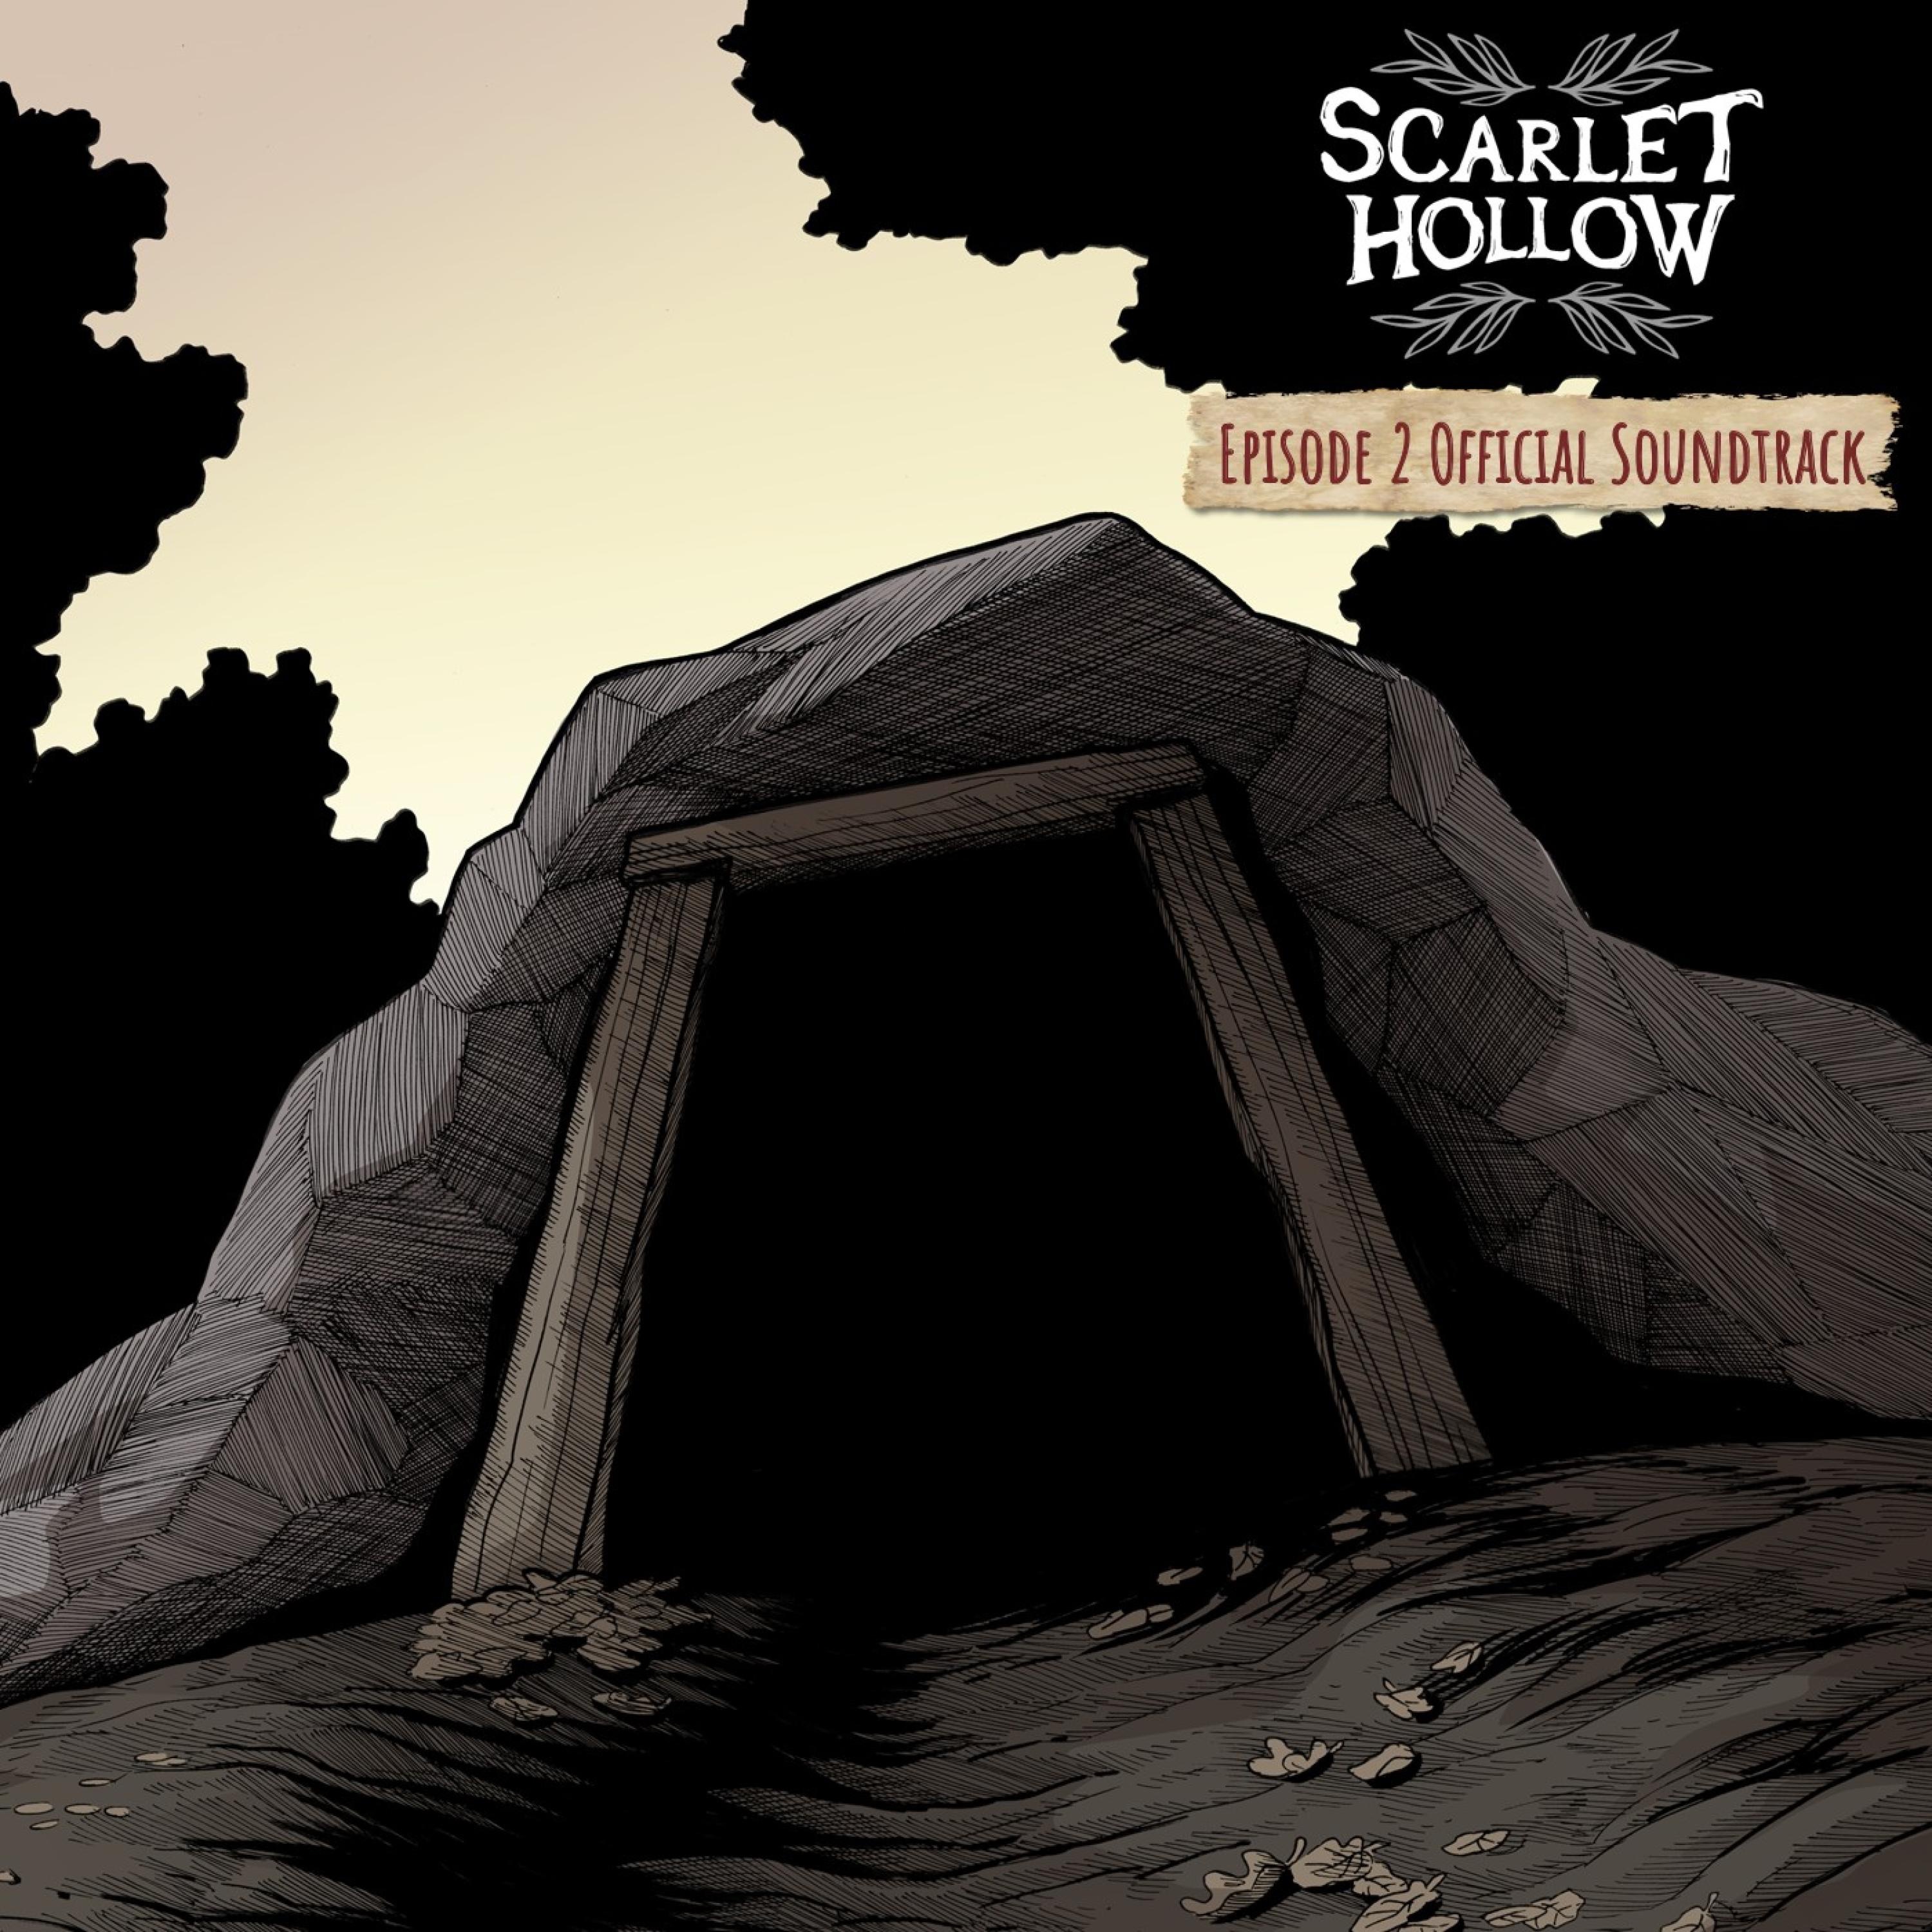 Scarlett Hollow. Scarlet Hollow способности. Scarlet Hollow Ghost. Scarlet Hollow a Window to October 2020. Soundtrack episode